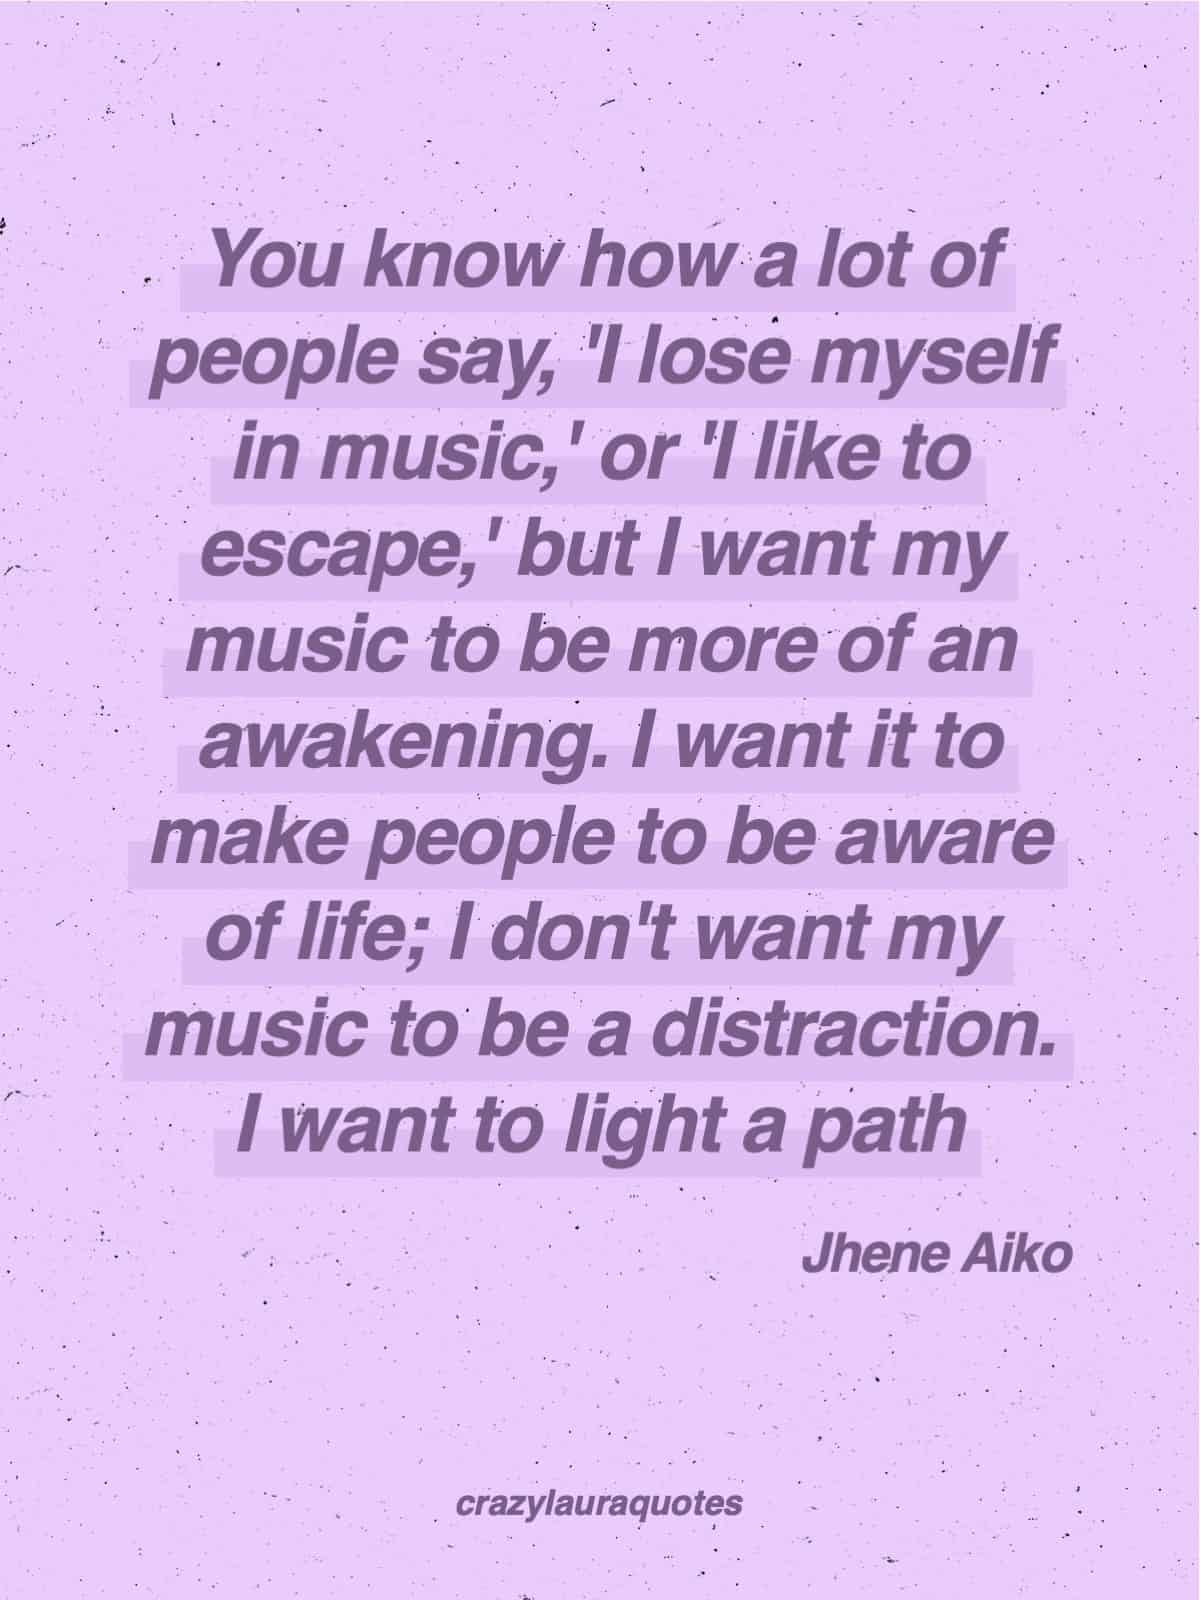 music to give light inspirational quote